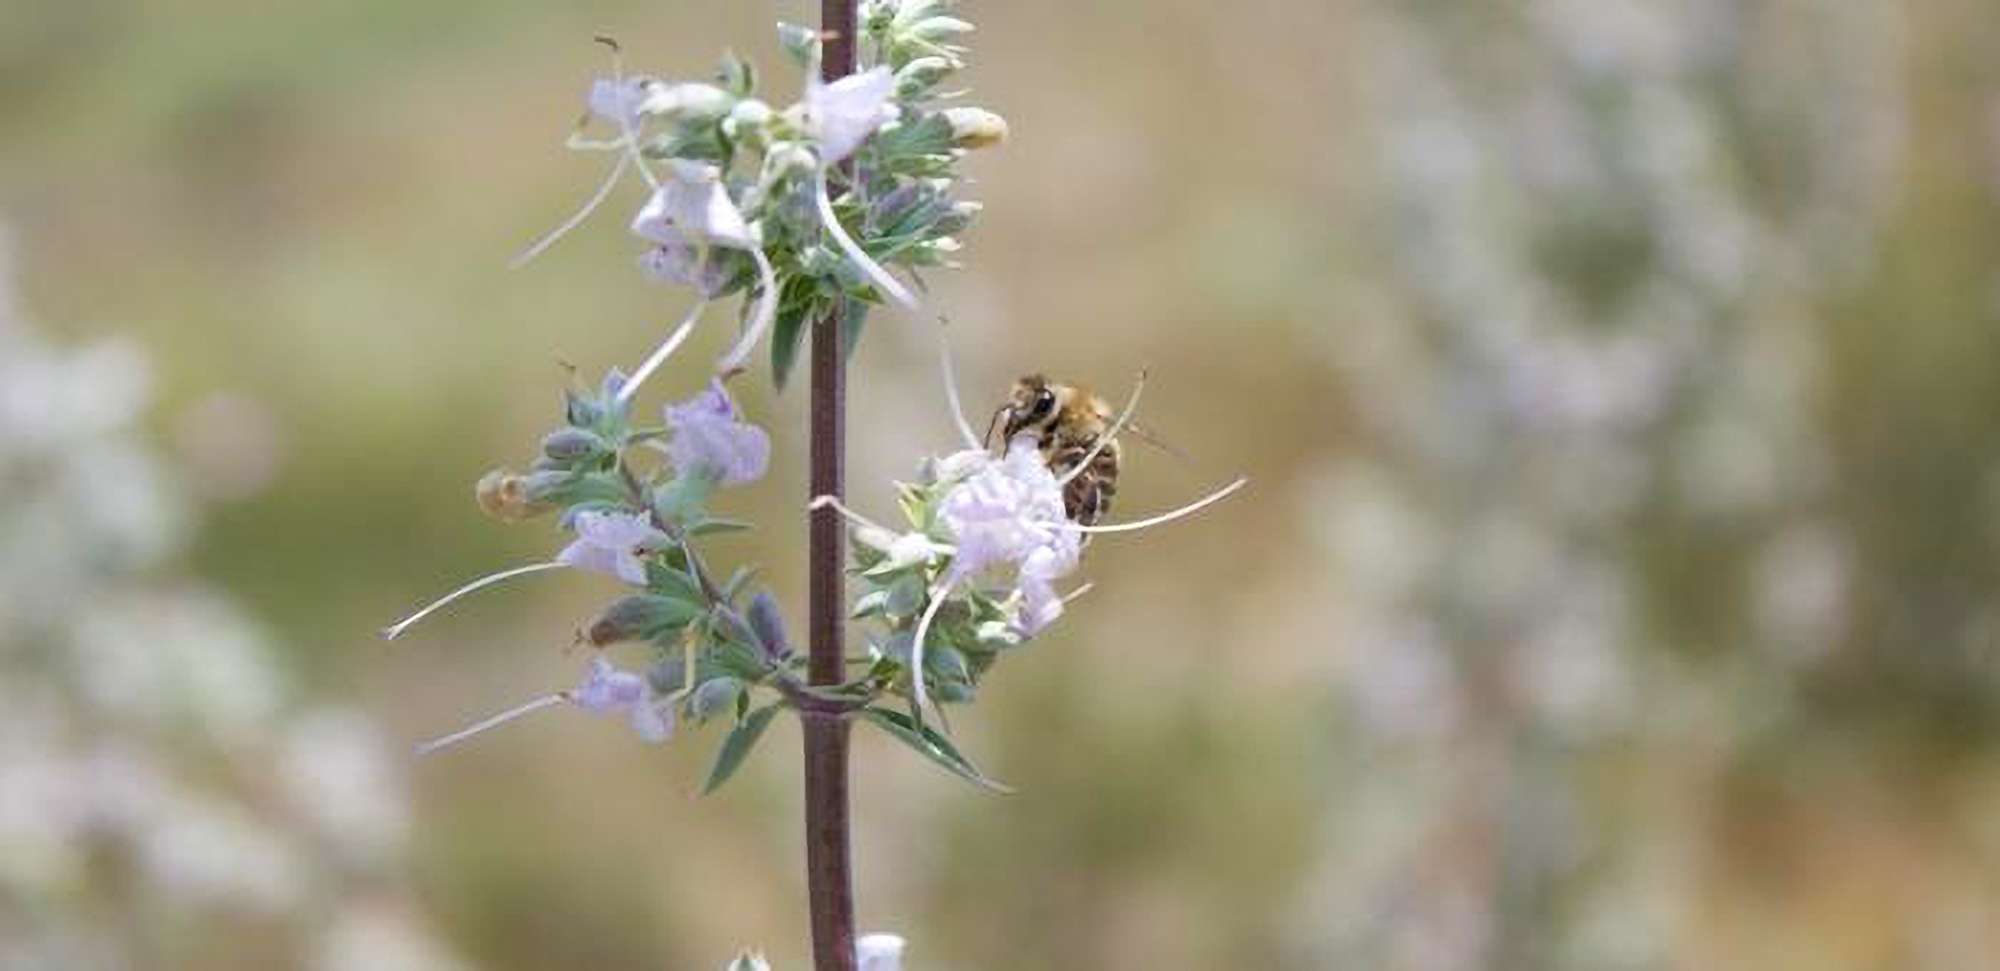 Honeybees’ Flower Preferences Could Lead To More…